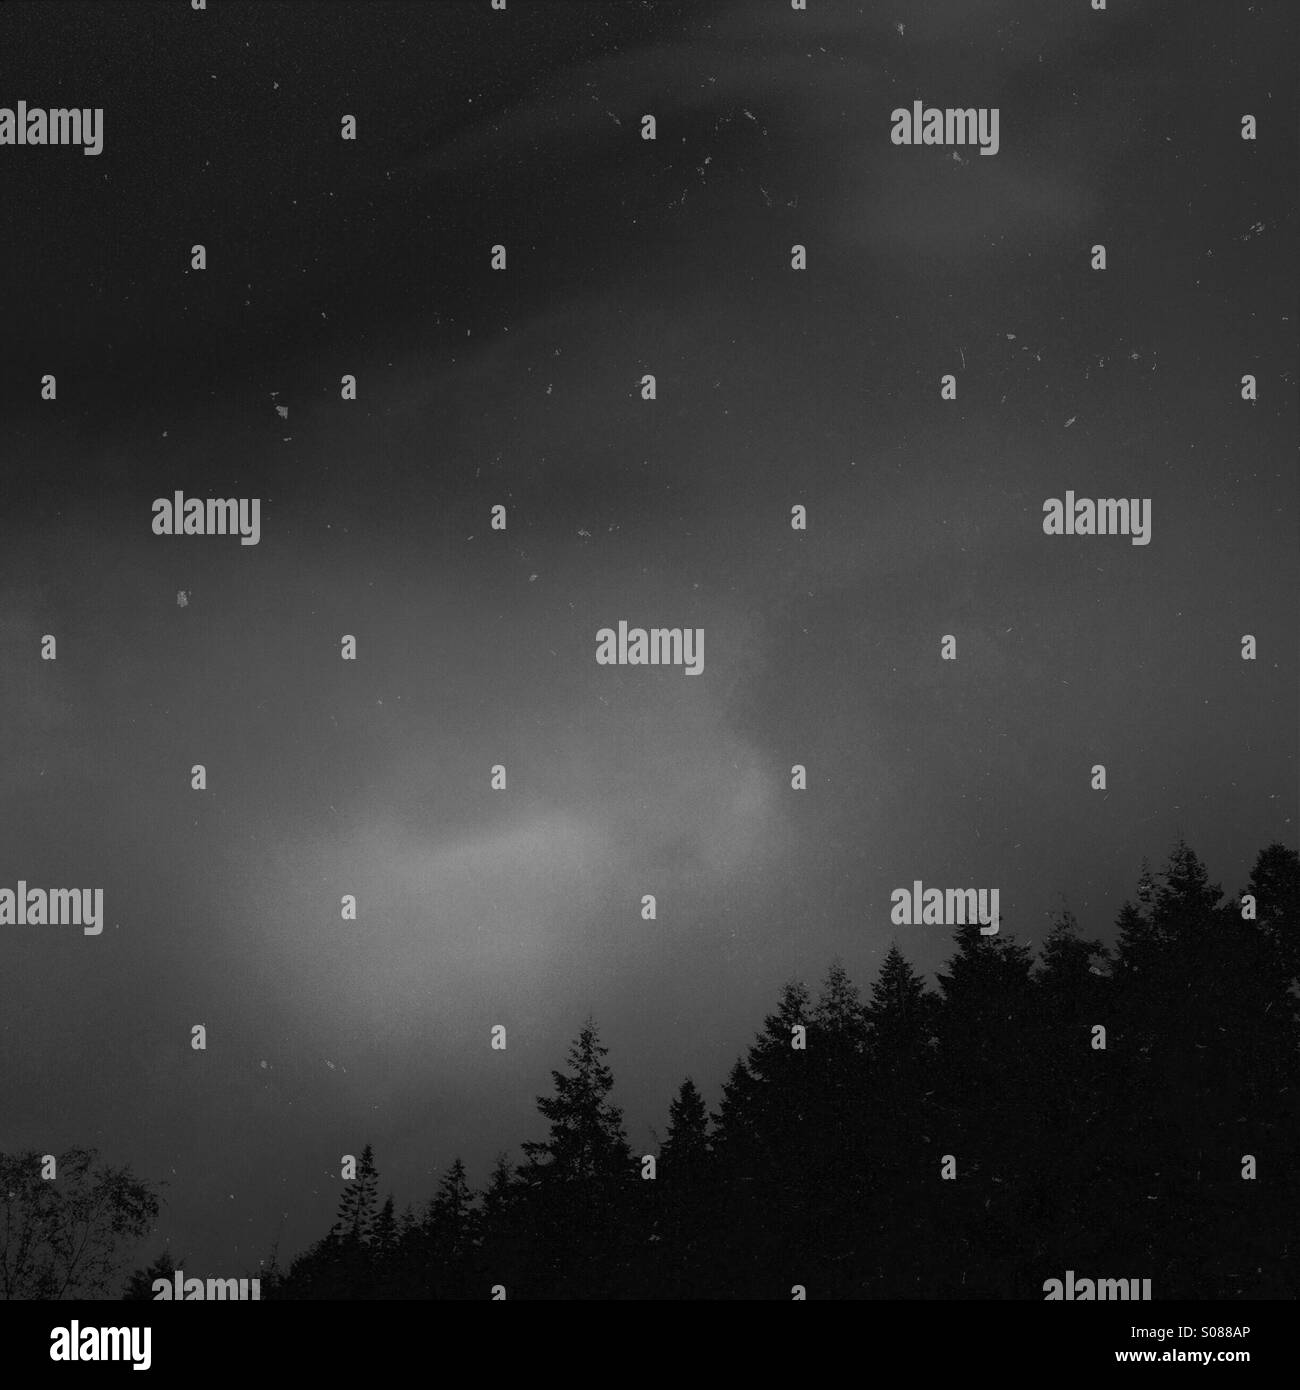 Stars in the sky above trees. Stock Photo